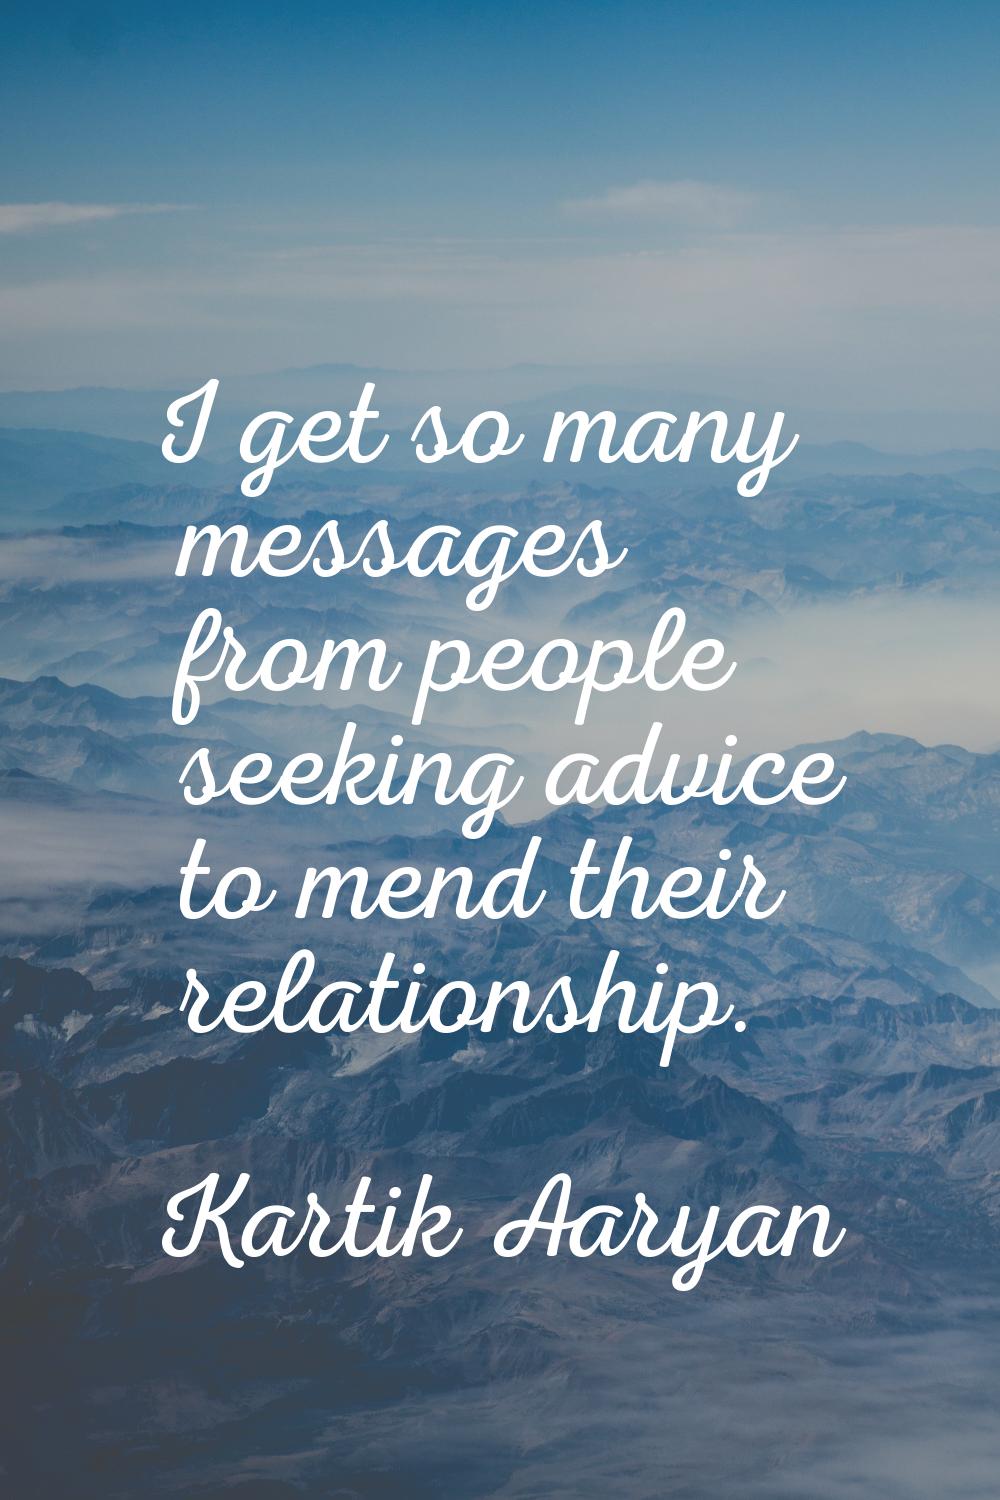 I get so many messages from people seeking advice to mend their relationship.